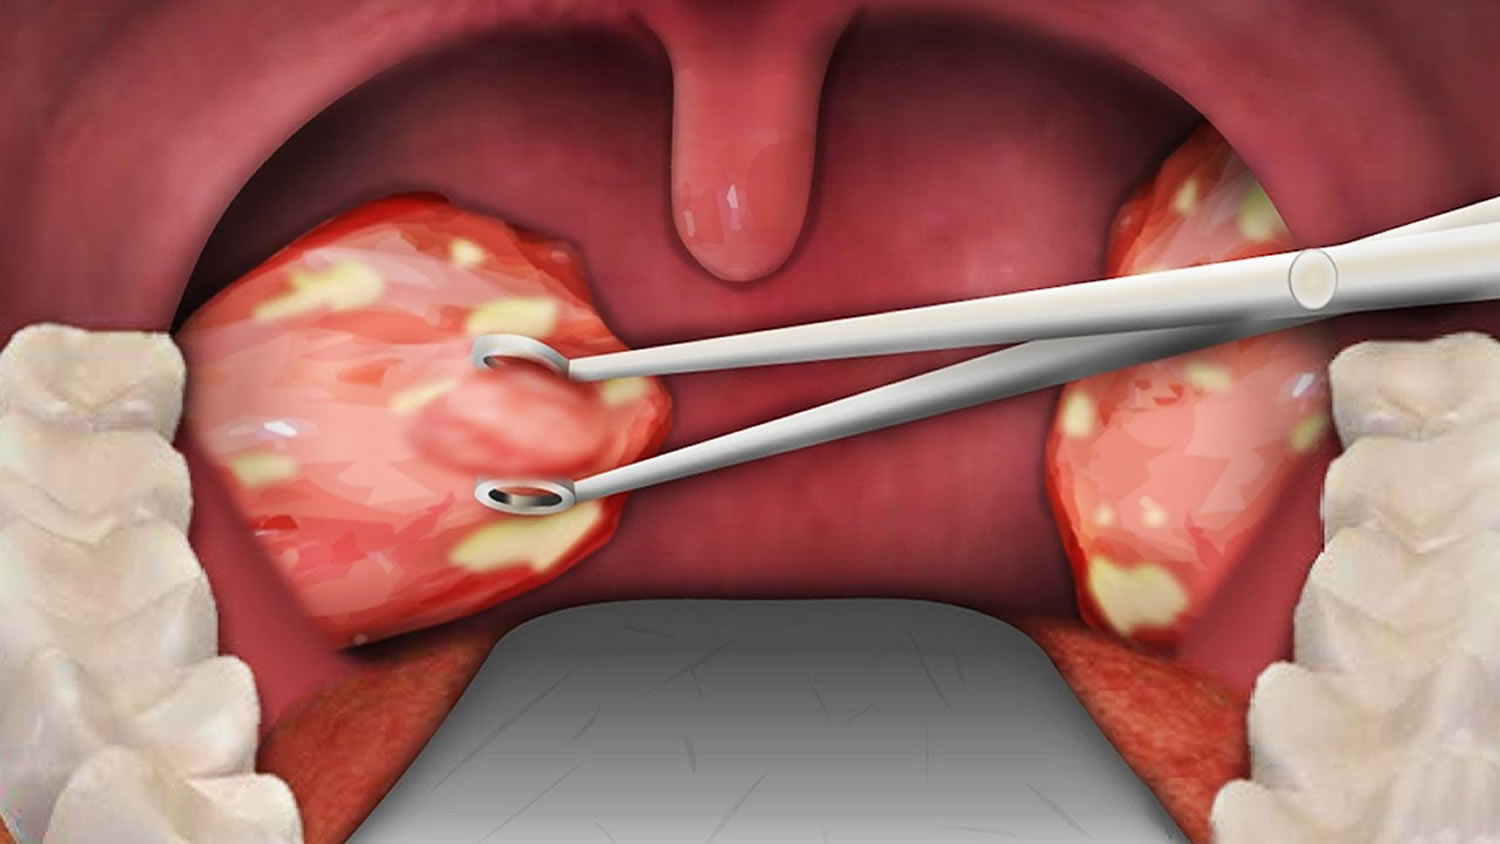 INDICATIONS AND CONTRAINDICATIONS OF TONSILLECTOMY